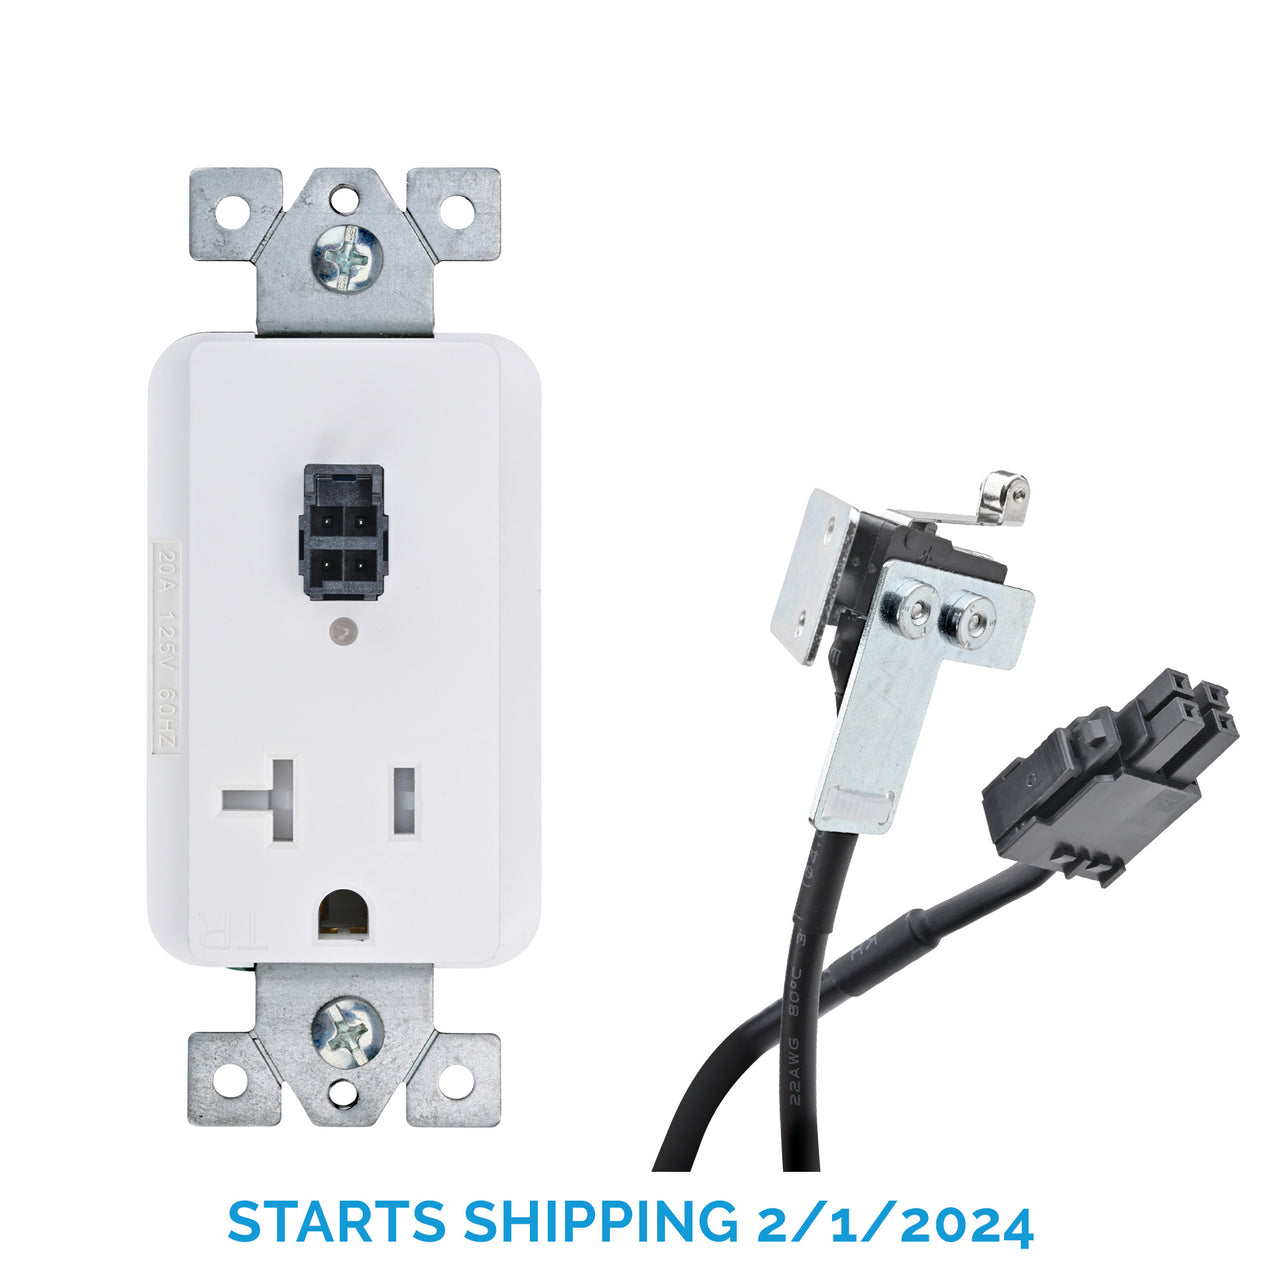 20 amp Safety Interlock Outlet with Blade Limit Switch